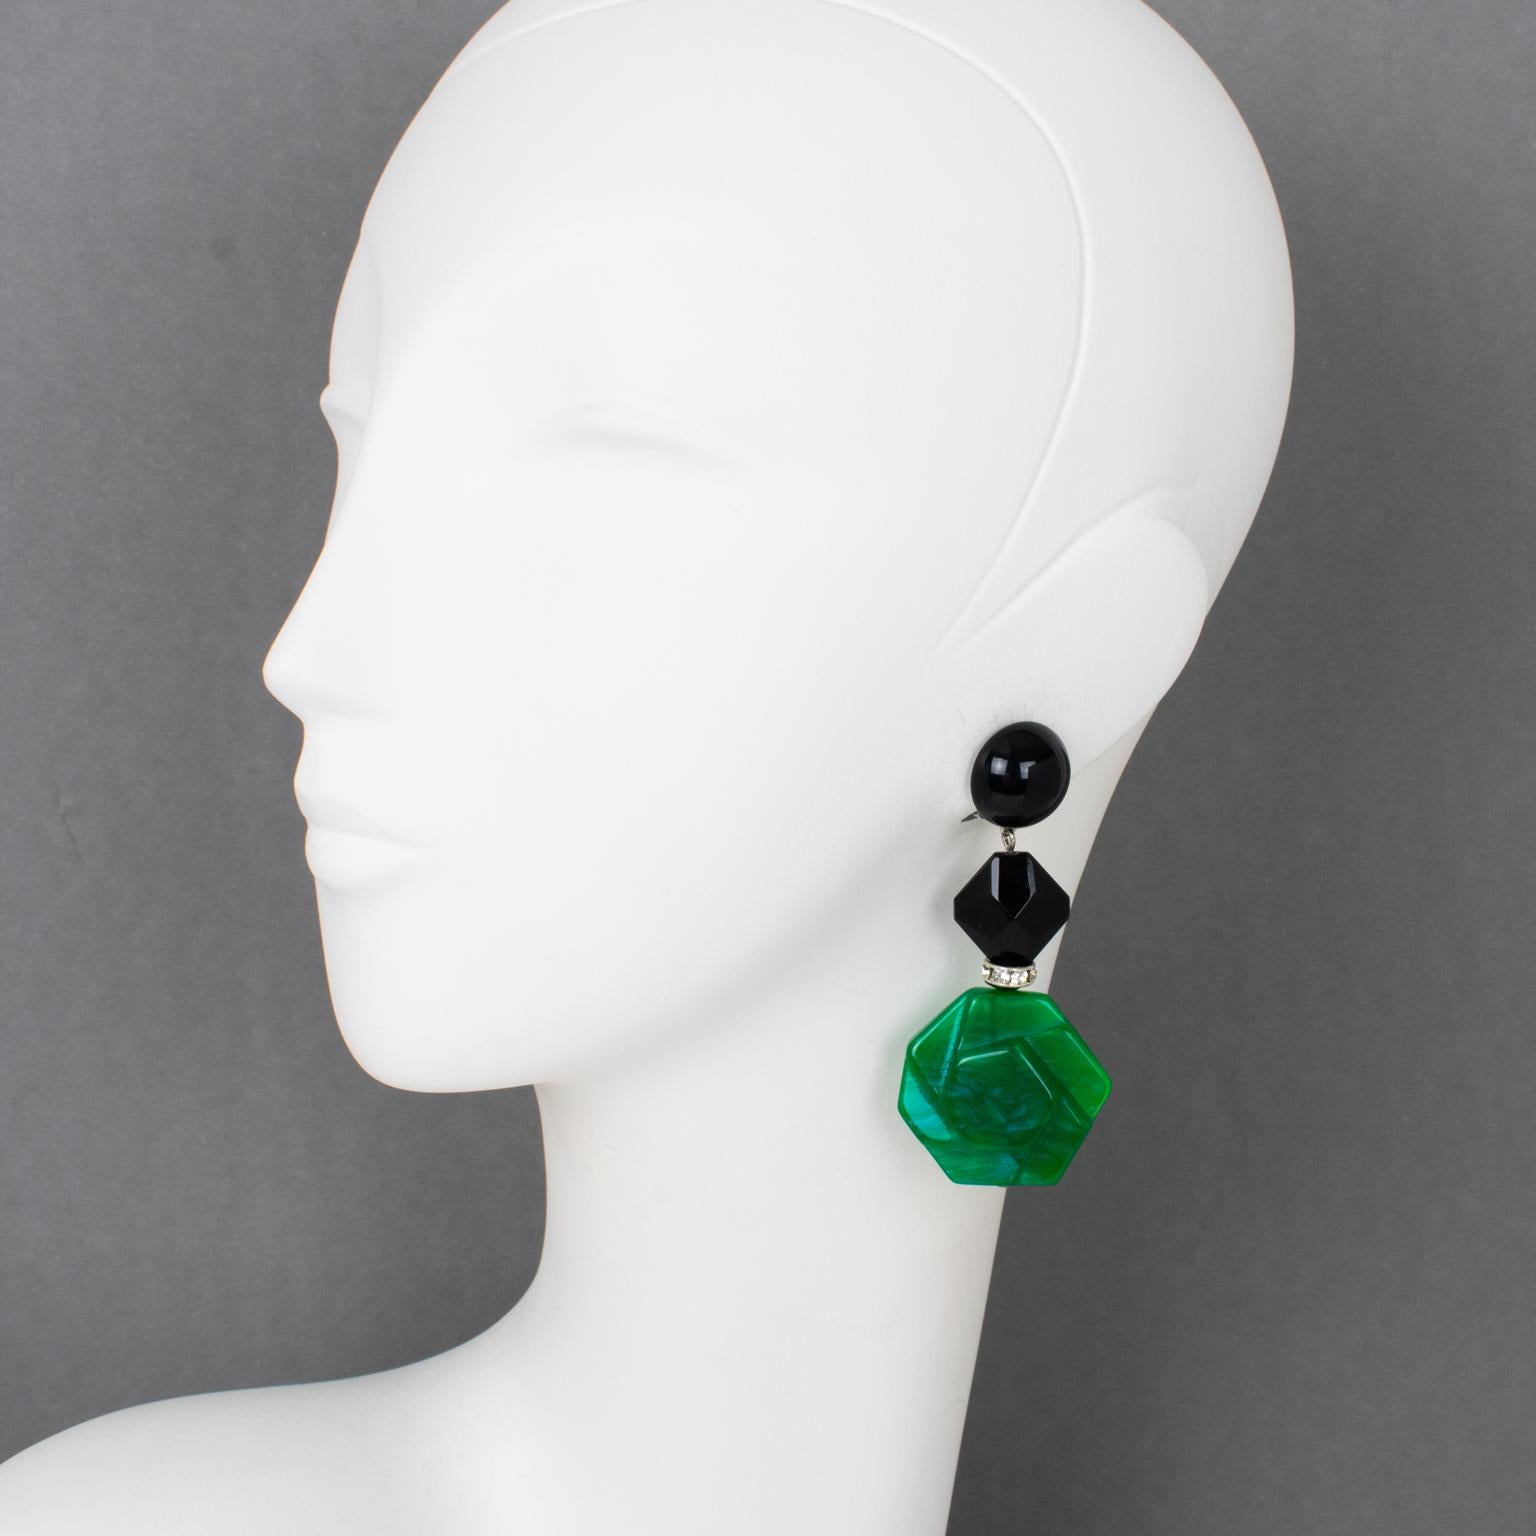 These very chic Angela Caputi, made-in-Italy resin clip-on earrings feature a dangling shape with black color contrasted with emerald green marble resin geometric pebble beads and complimented with crystal rhinestone spacers. Her matching colors are